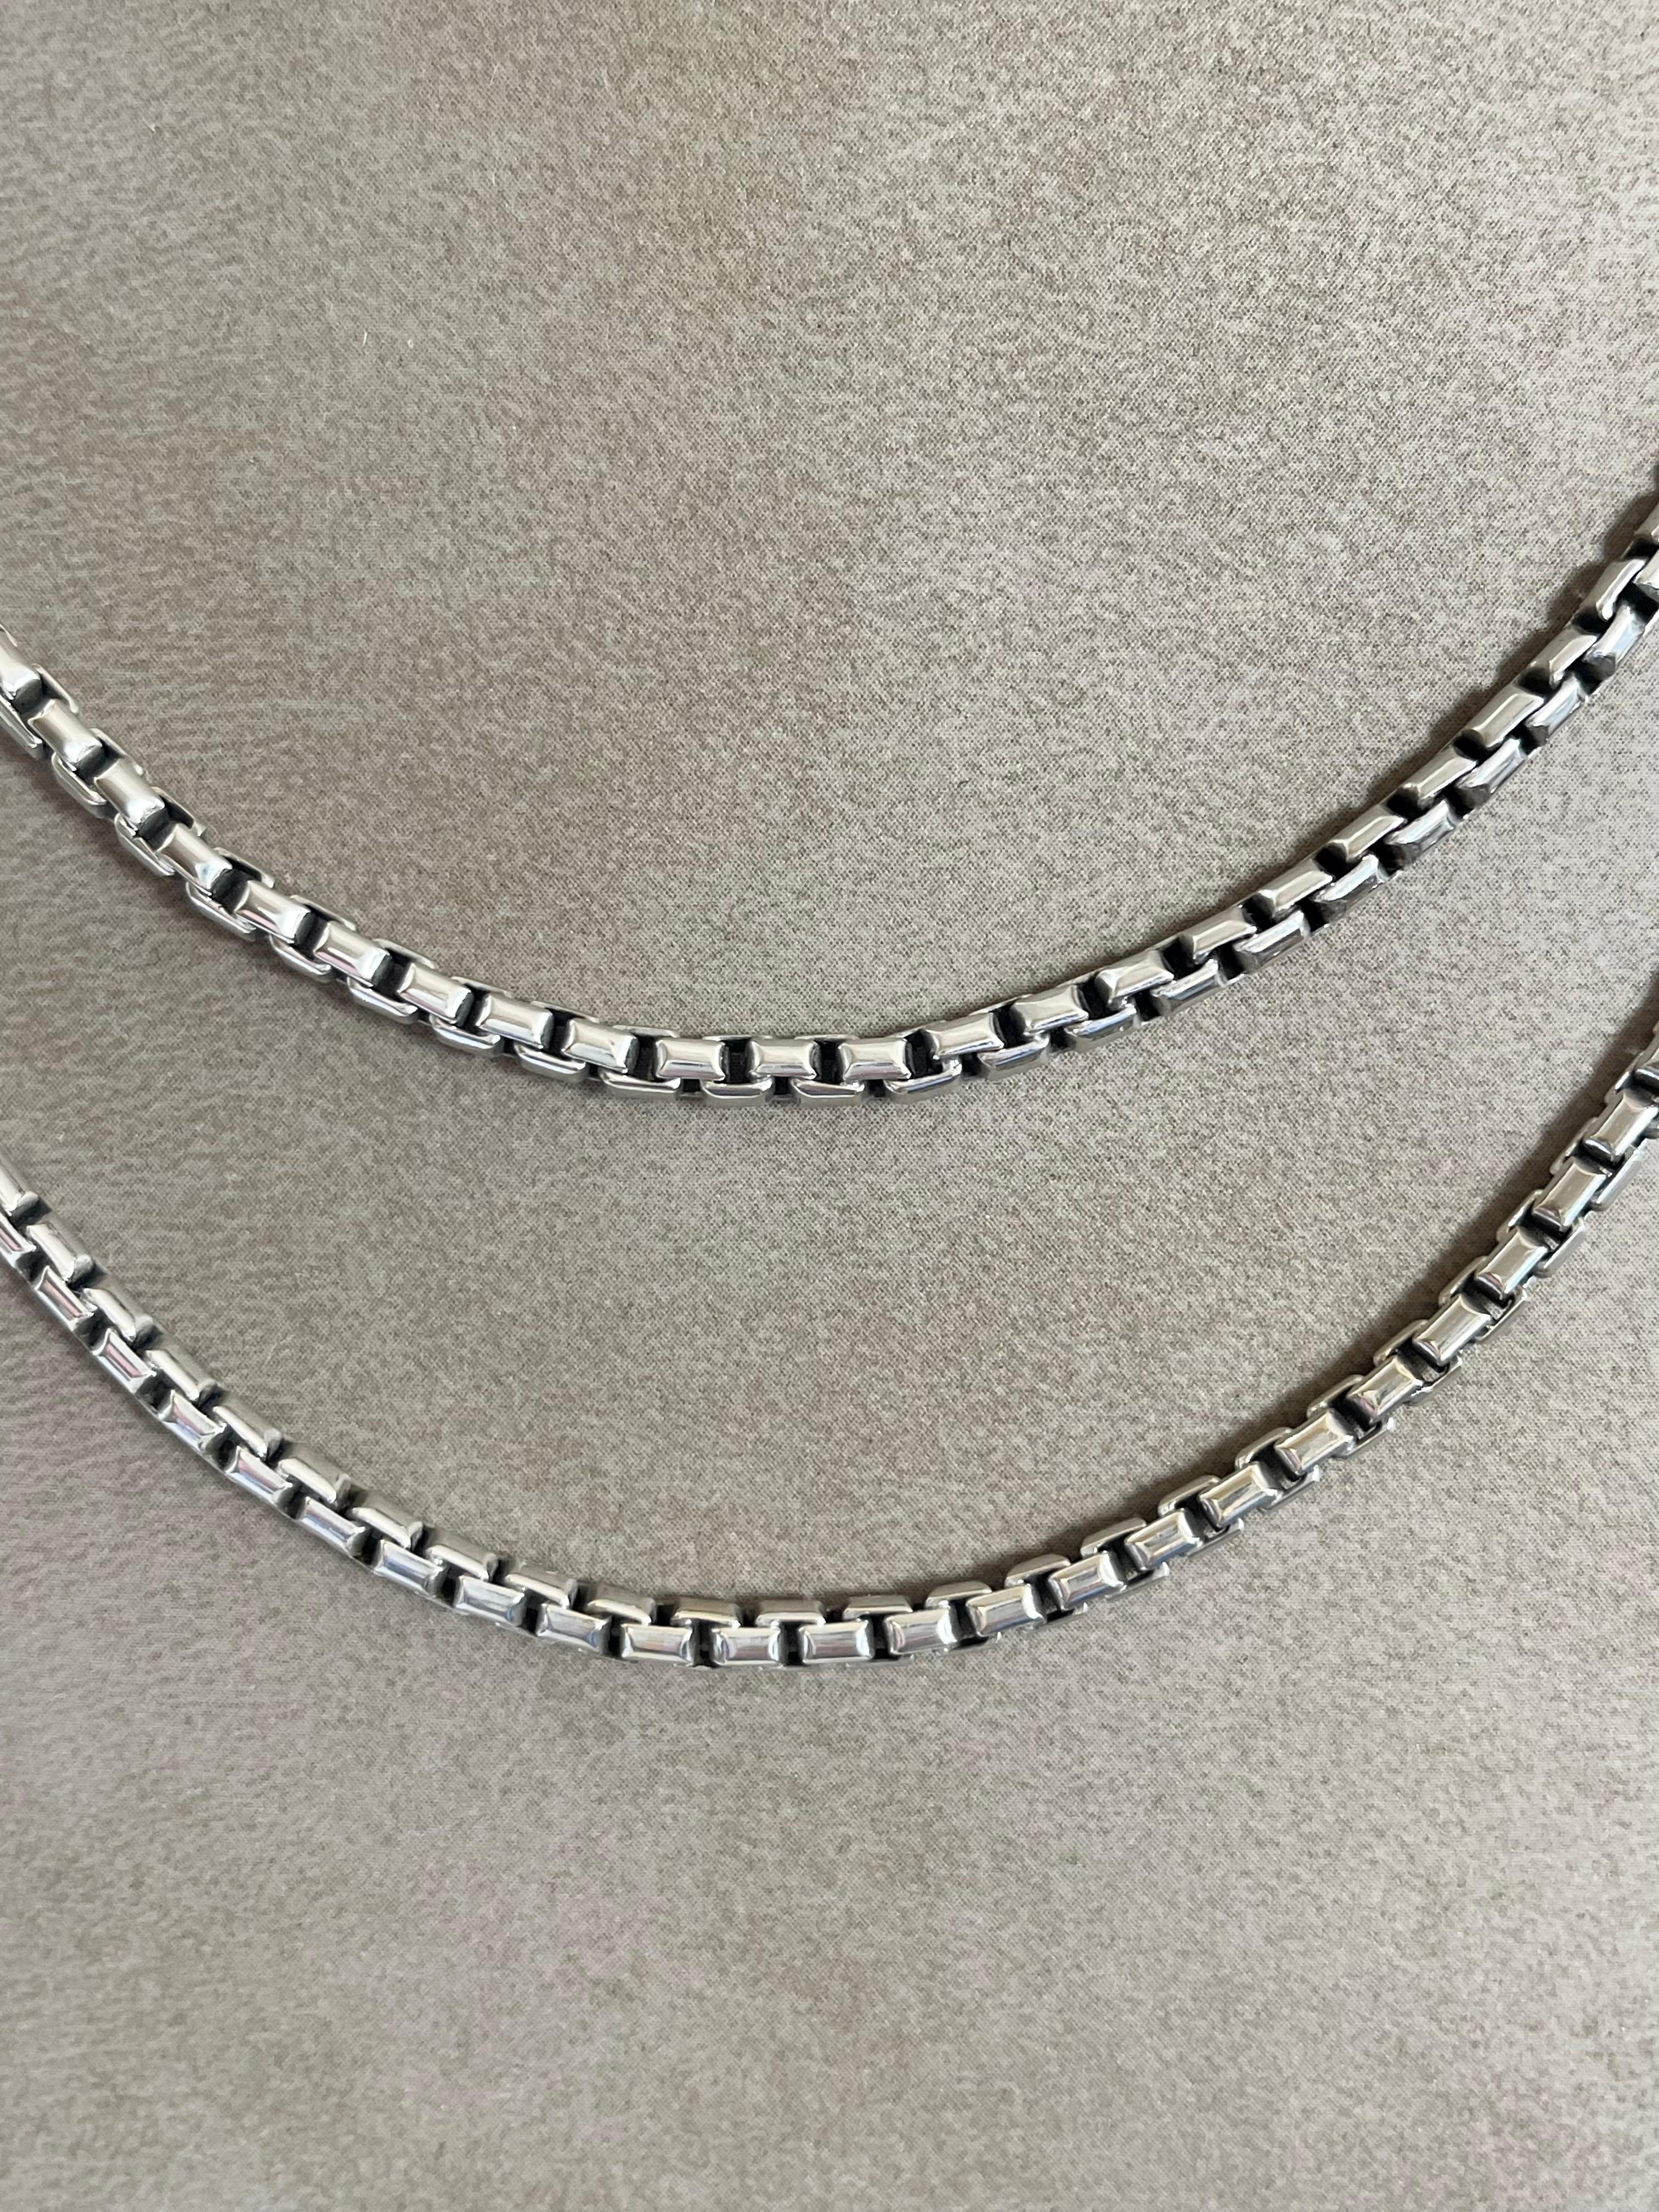 Very classy solid handmade 18 K white Gold chain, length 90 cm. Can be word as a long chain or as a shorter version with 2 rows. 59.78 grams. Also an ideal necklace for a man!
Masterfully handcrafted piece! Authenticity and money back is